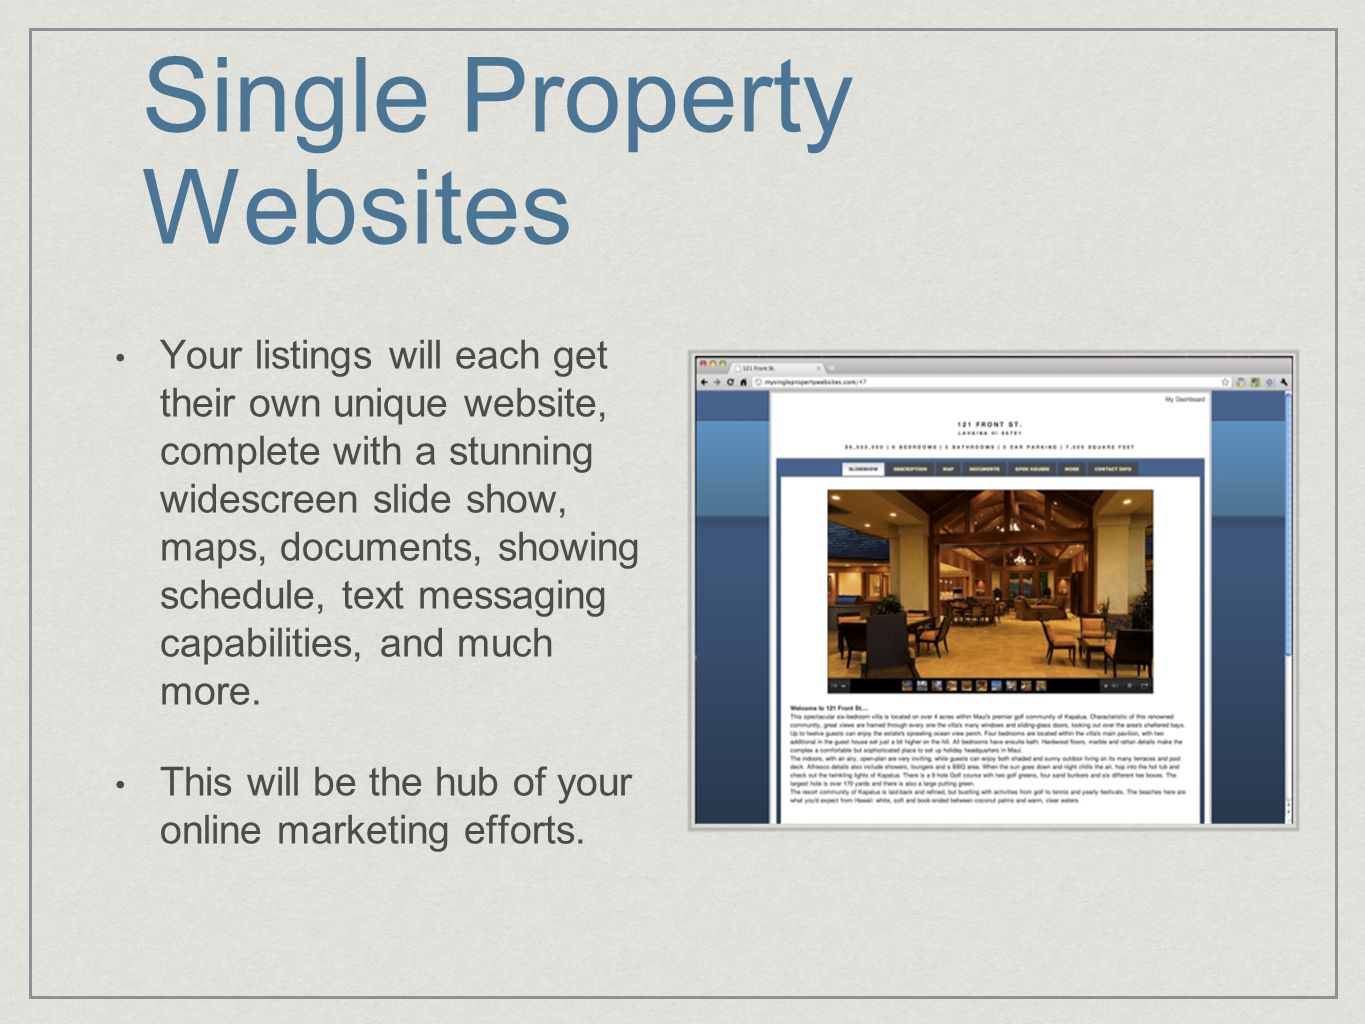 Single Property Websites Your listings will each get their own unique website, complete with a stunning widescreen slide show, maps, documents, showing schedule, text messaging capabilities, and much more.